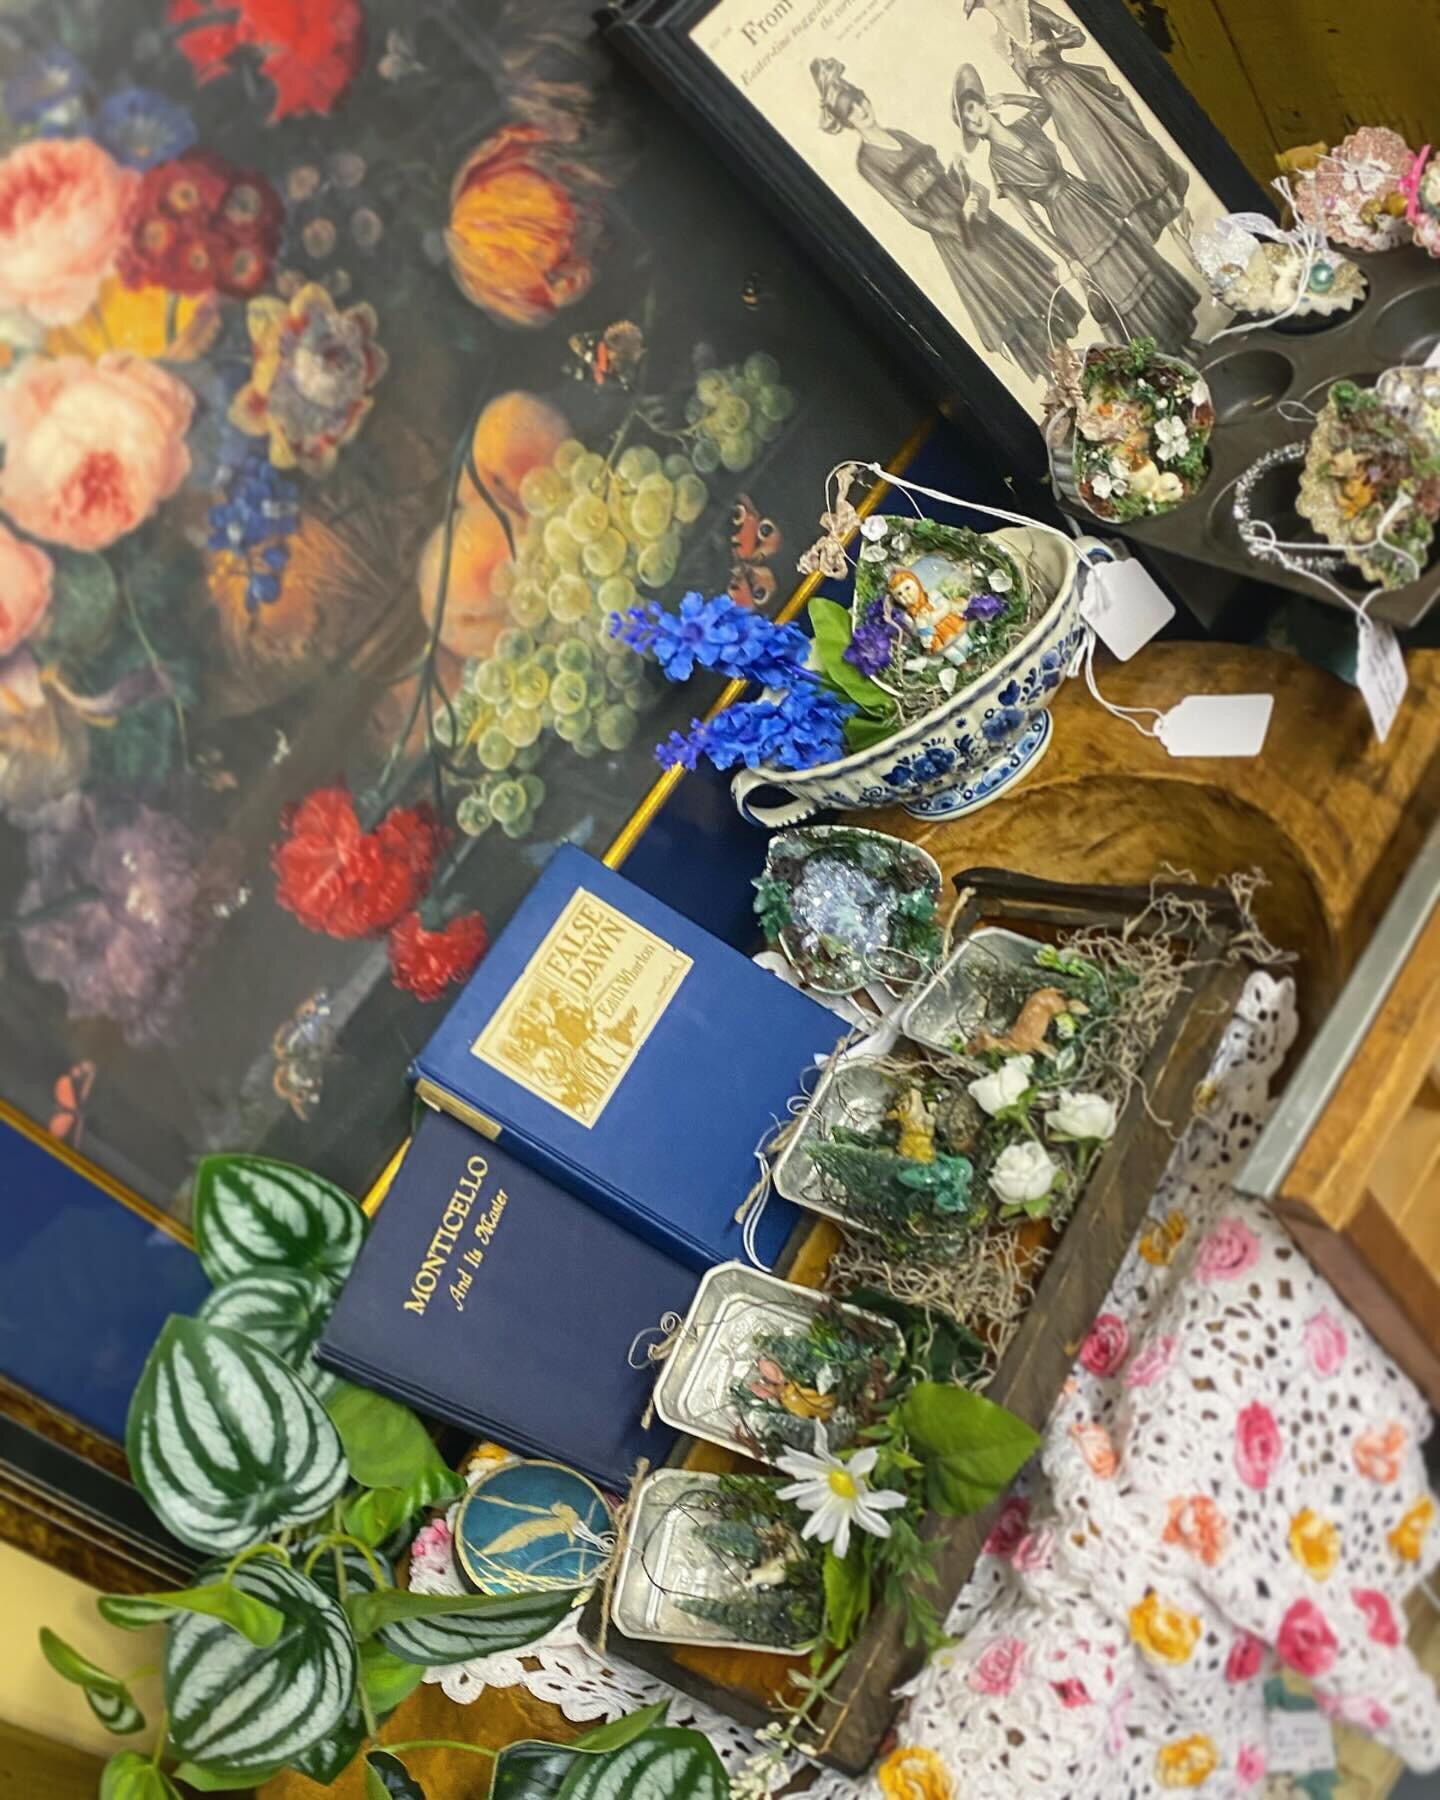 New arrivals in Booth 56 at @antiquesinbridgeville 🌺 🌸 ✨ Our handmade theme for spring is magic woodland: whimsical embellishments of mushrooms, flowers, and pink moss in dioramic scenes featuring fae &amp; animals. We have two new deer tart tin or